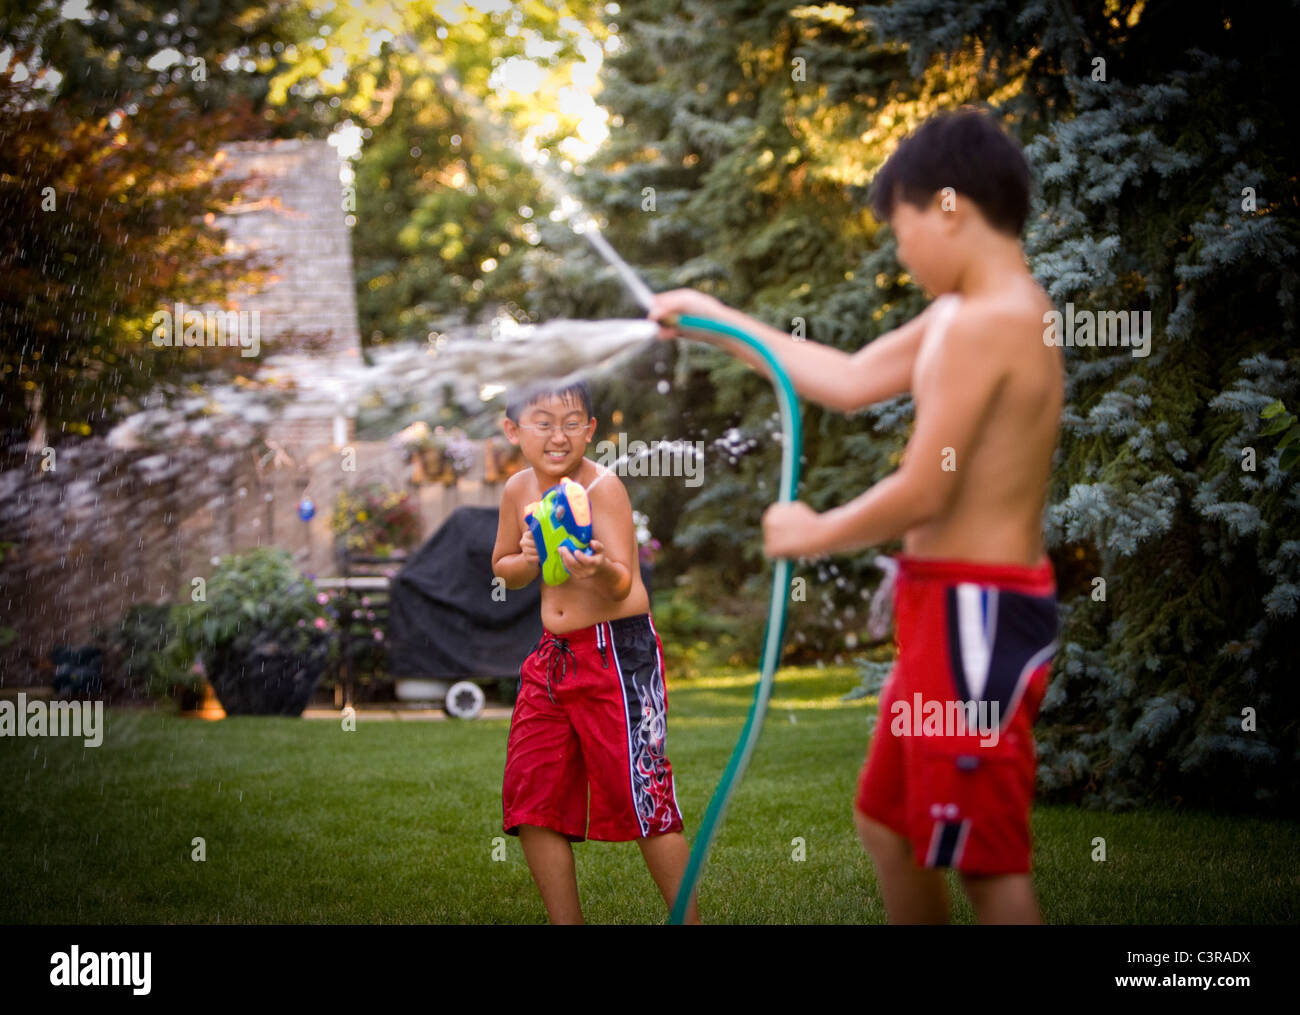 Young Boys Having A Water Fight In The Backyard Stock Photo